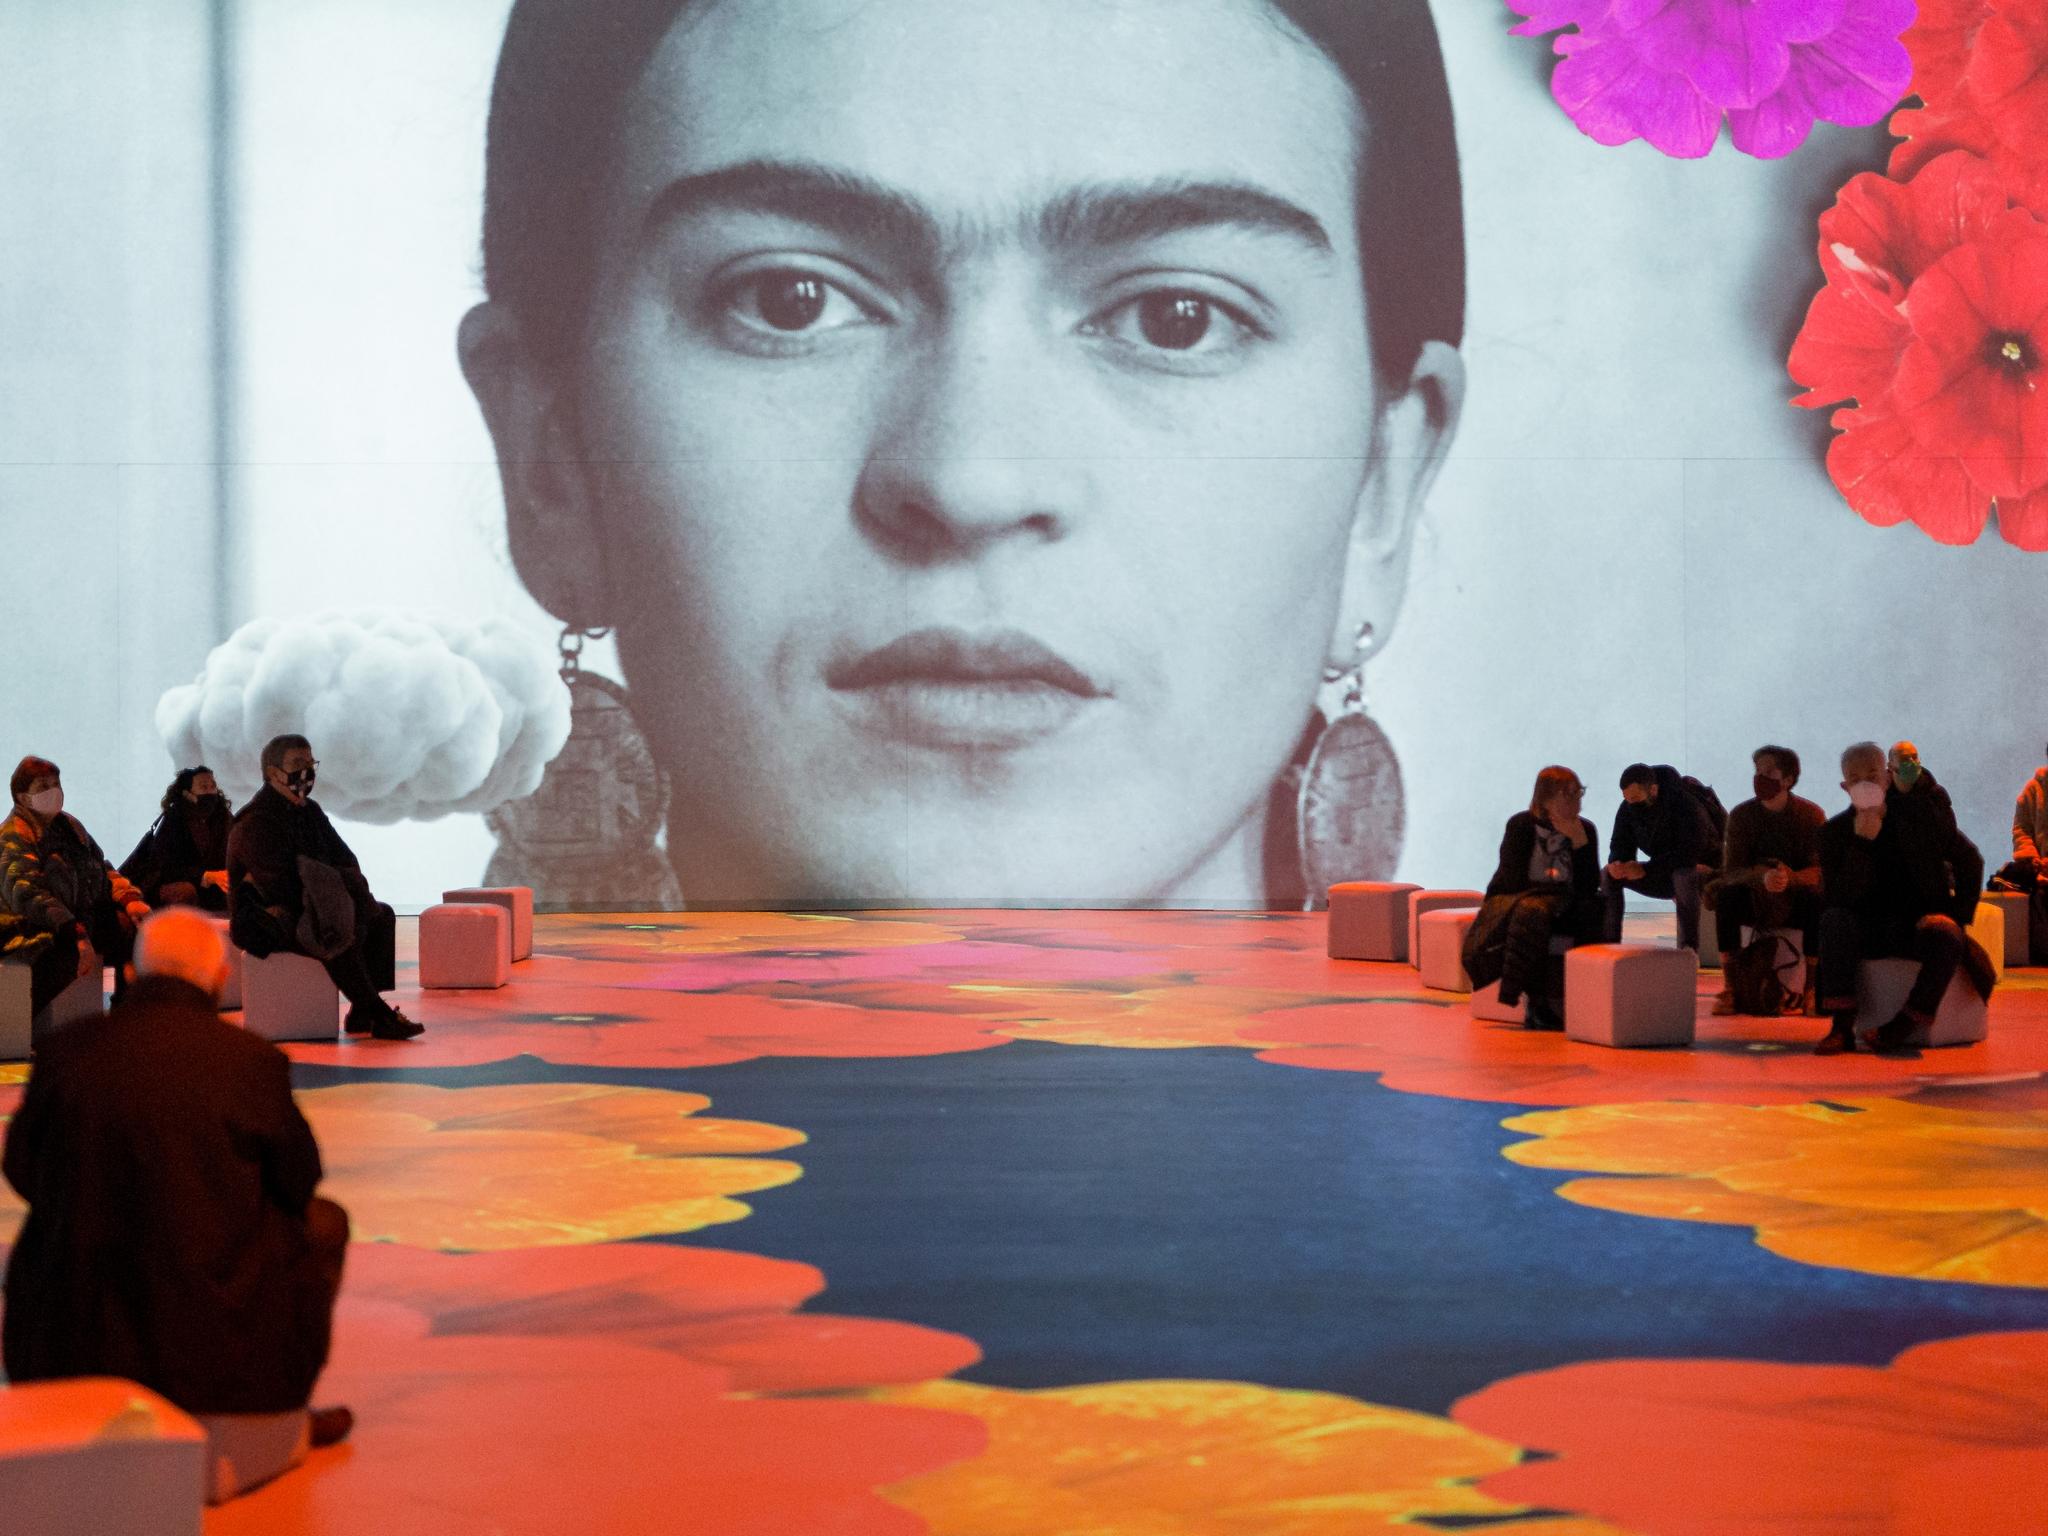 Artist Frida Kahlo\'s personal world of colour, character and pain